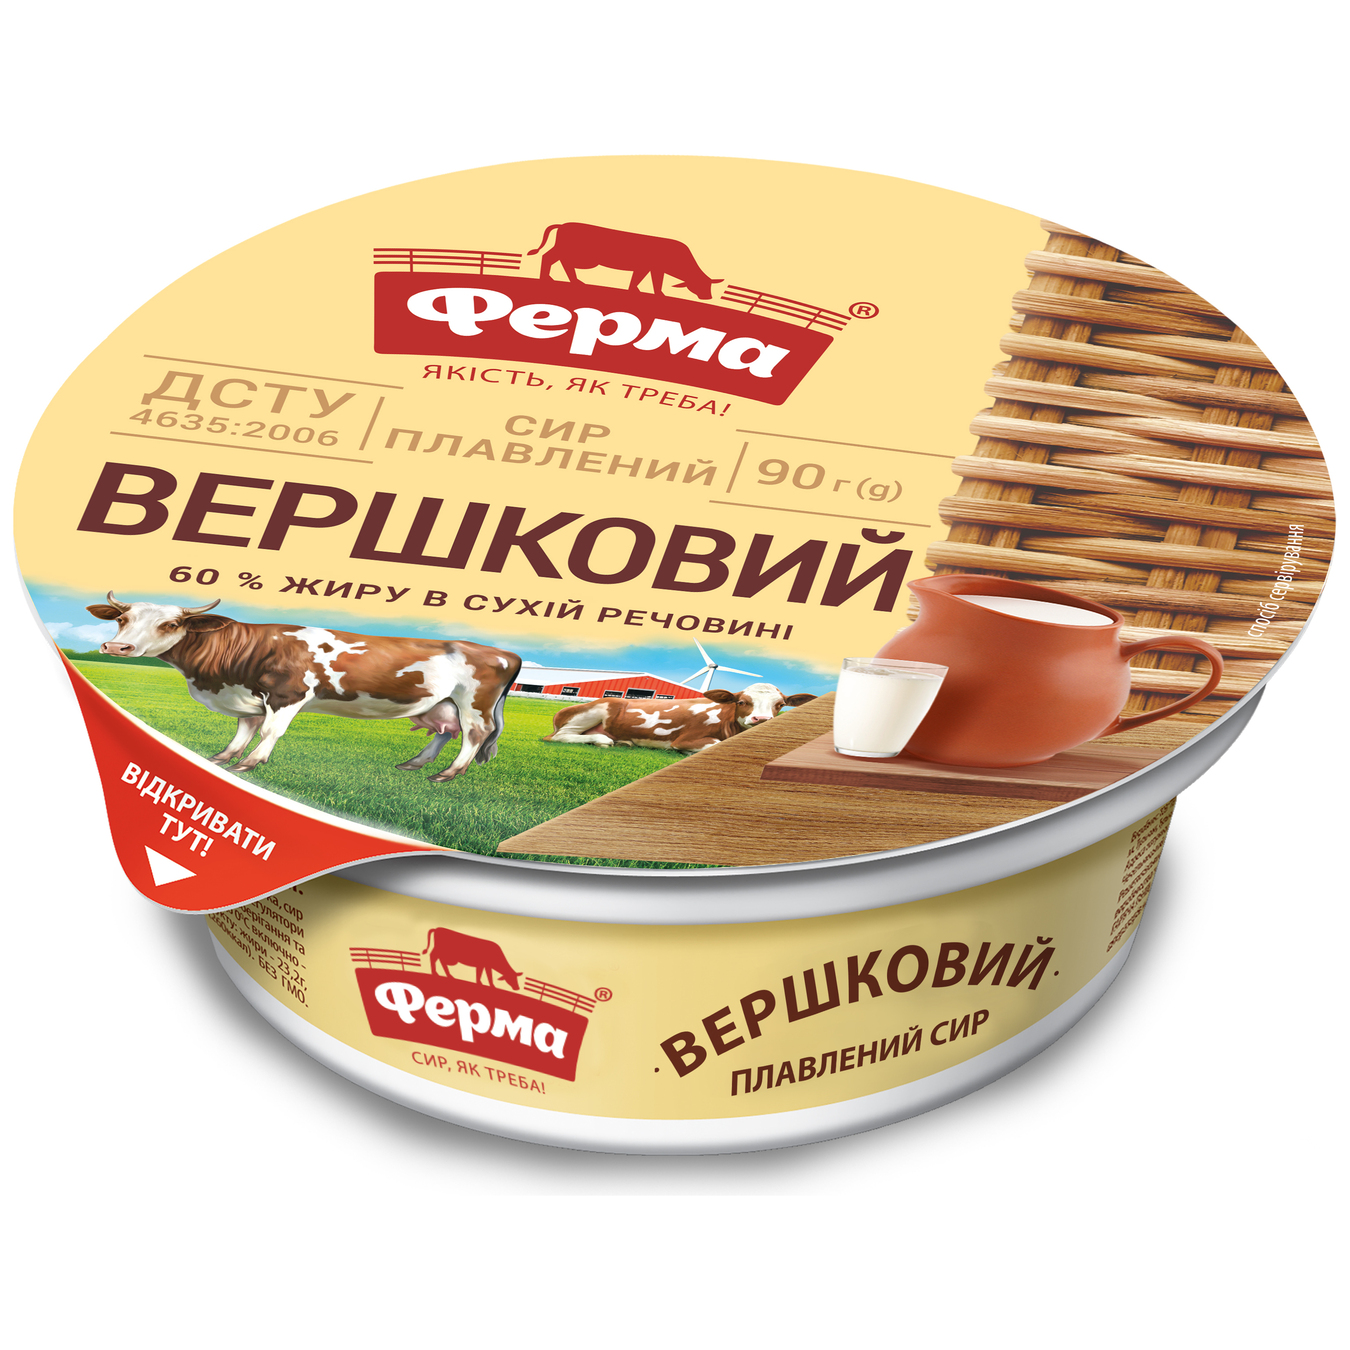 Ferma Creamy Processed Cheese 60% 90g